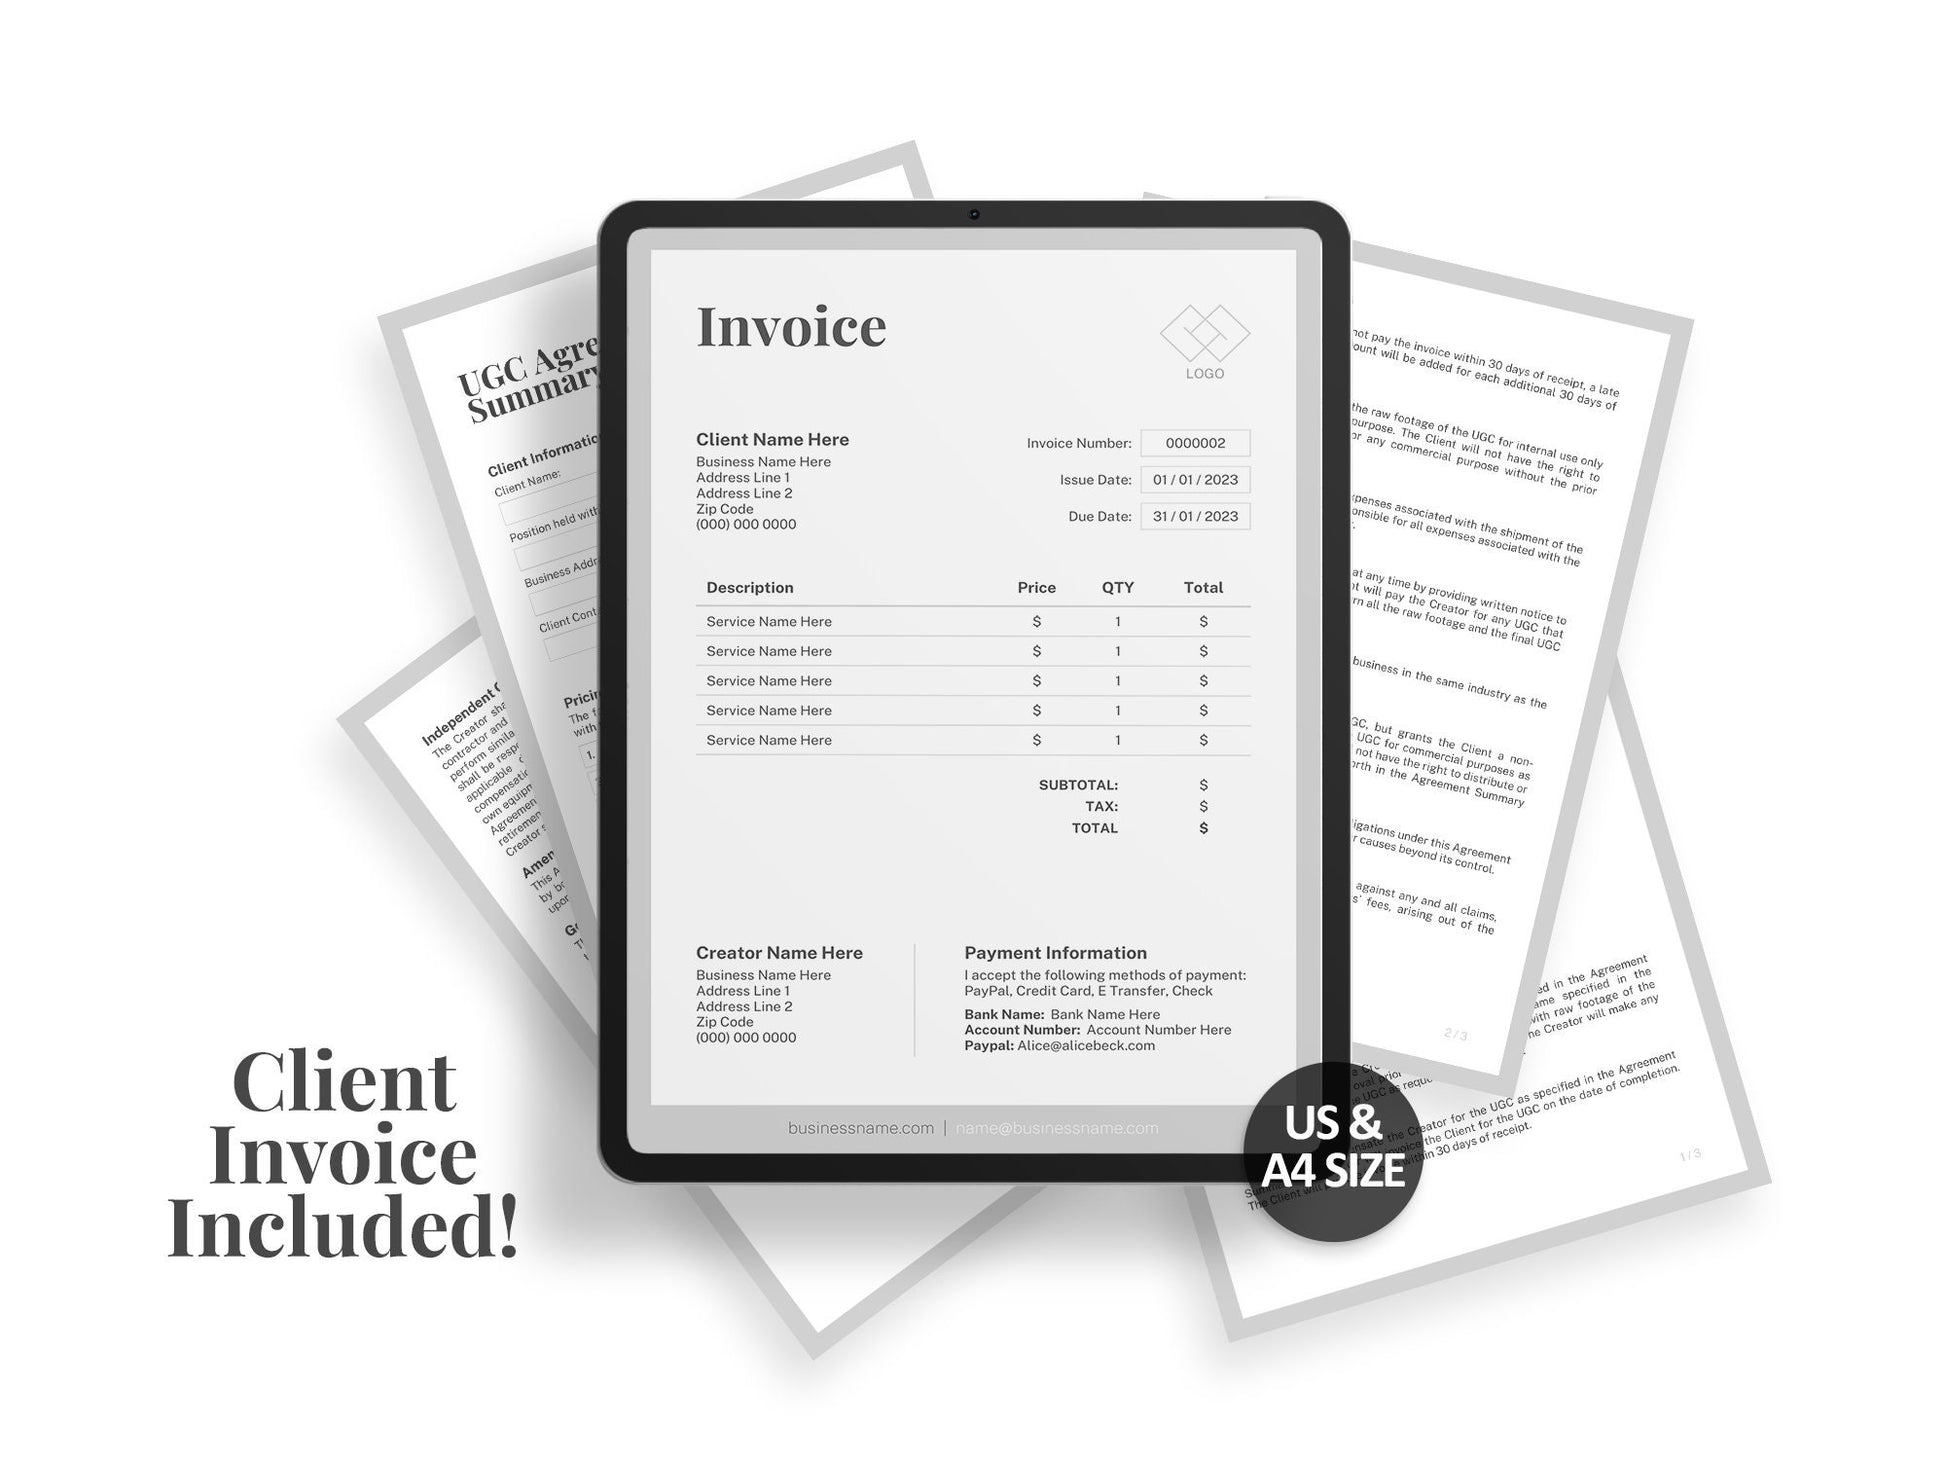 UGC Creator Contract Agreement Template, User Generated Content Template, Influencer Contract, UGC Invoice Template, Canva Template